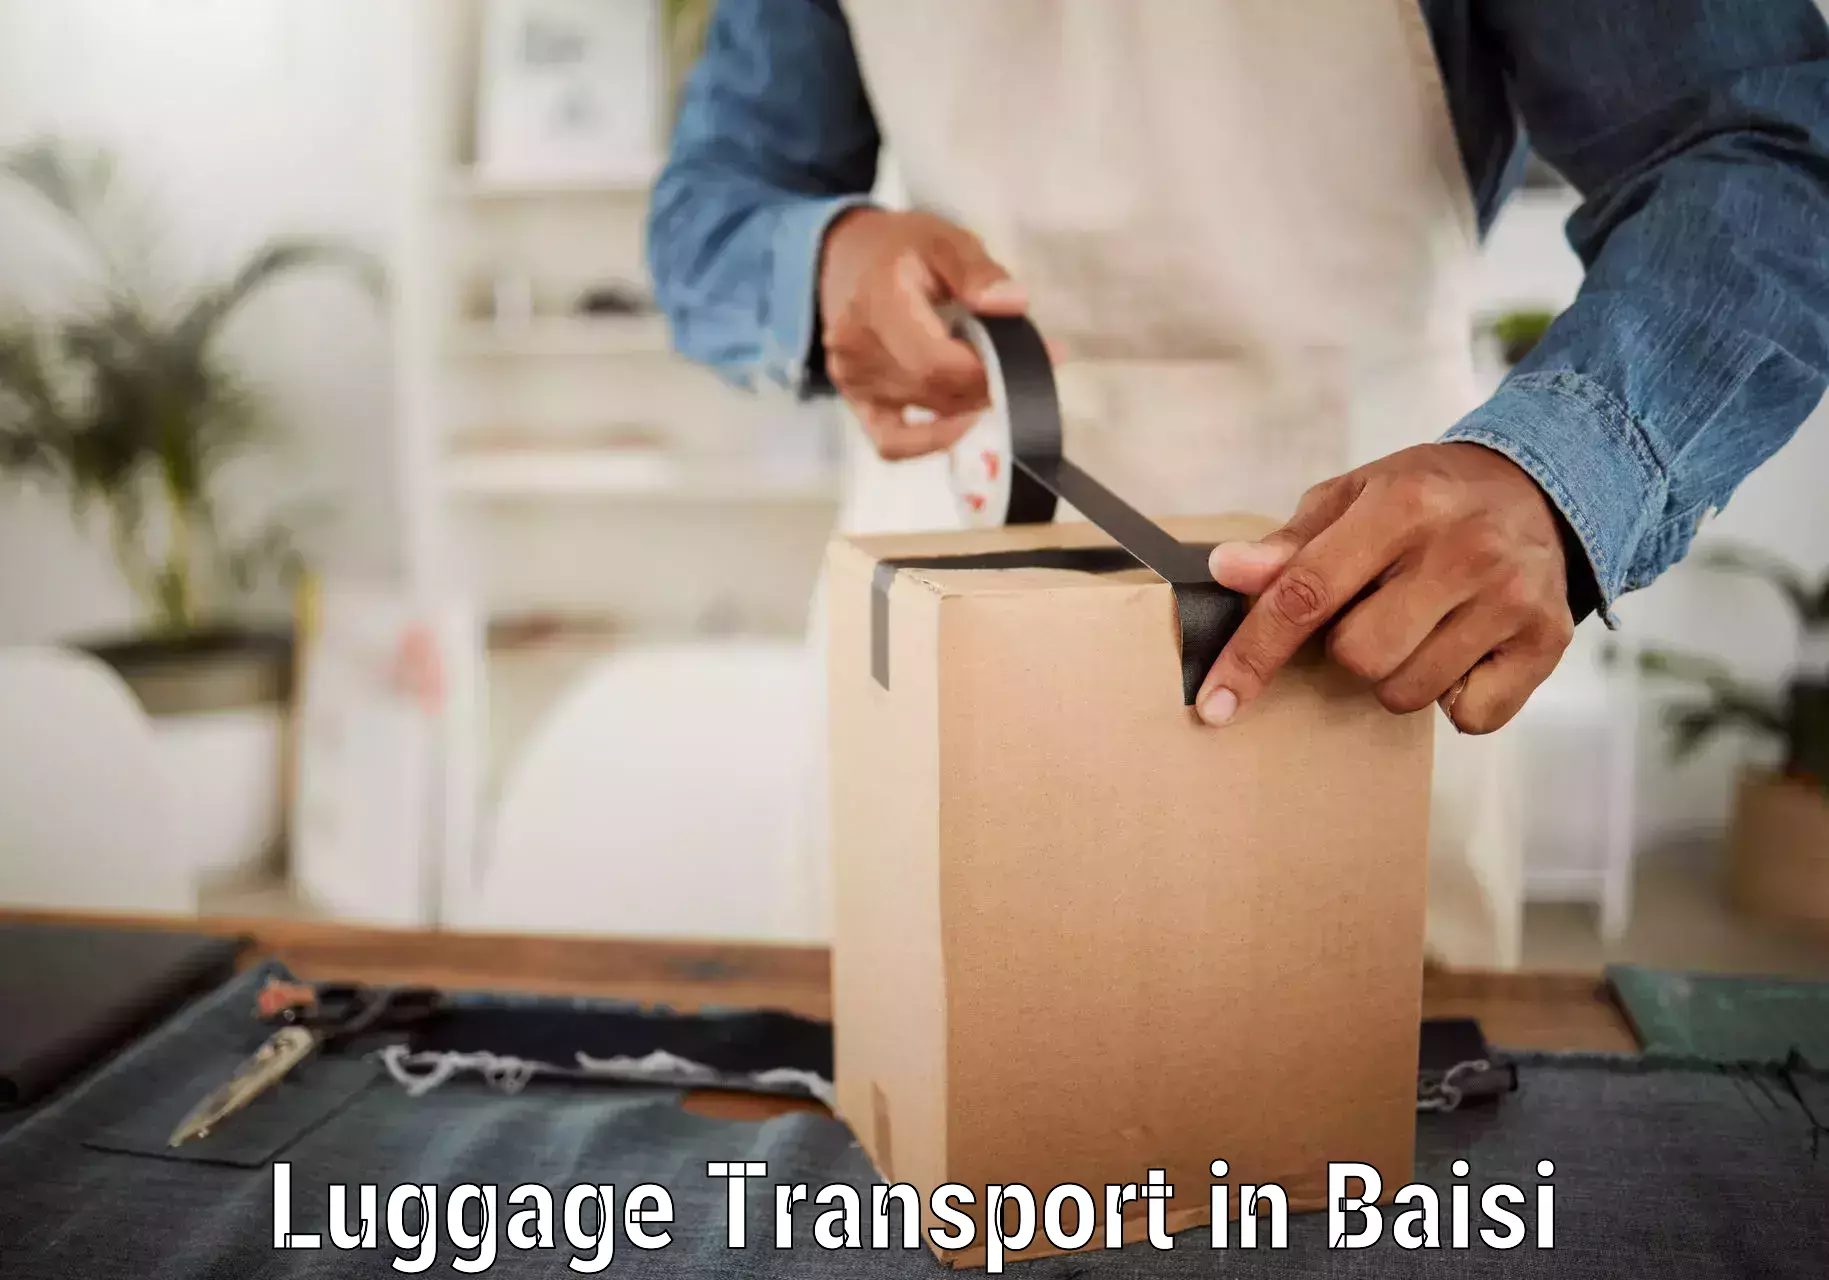 Domestic luggage transport in Baisi